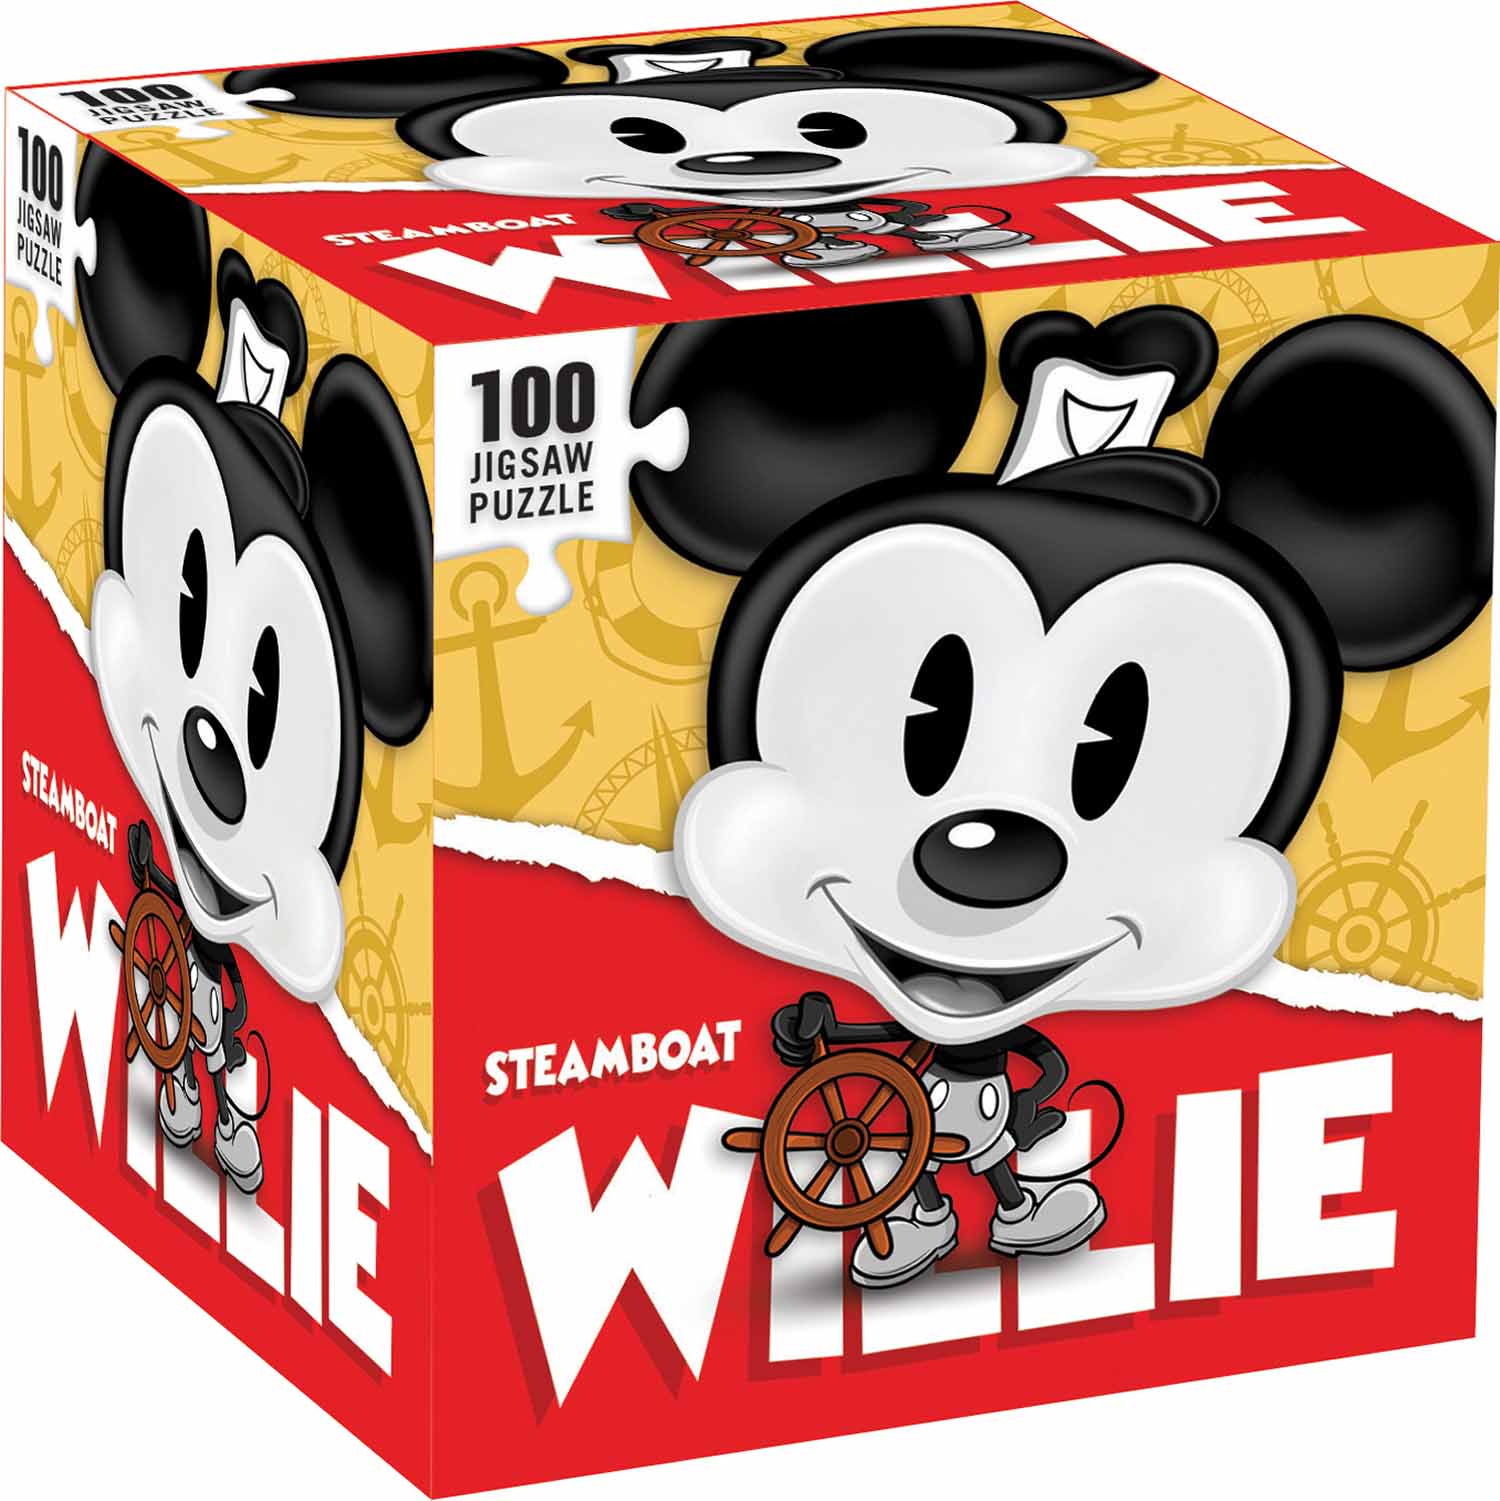 Steamboat Willie - Movies & TV Jigsaw Puzzle